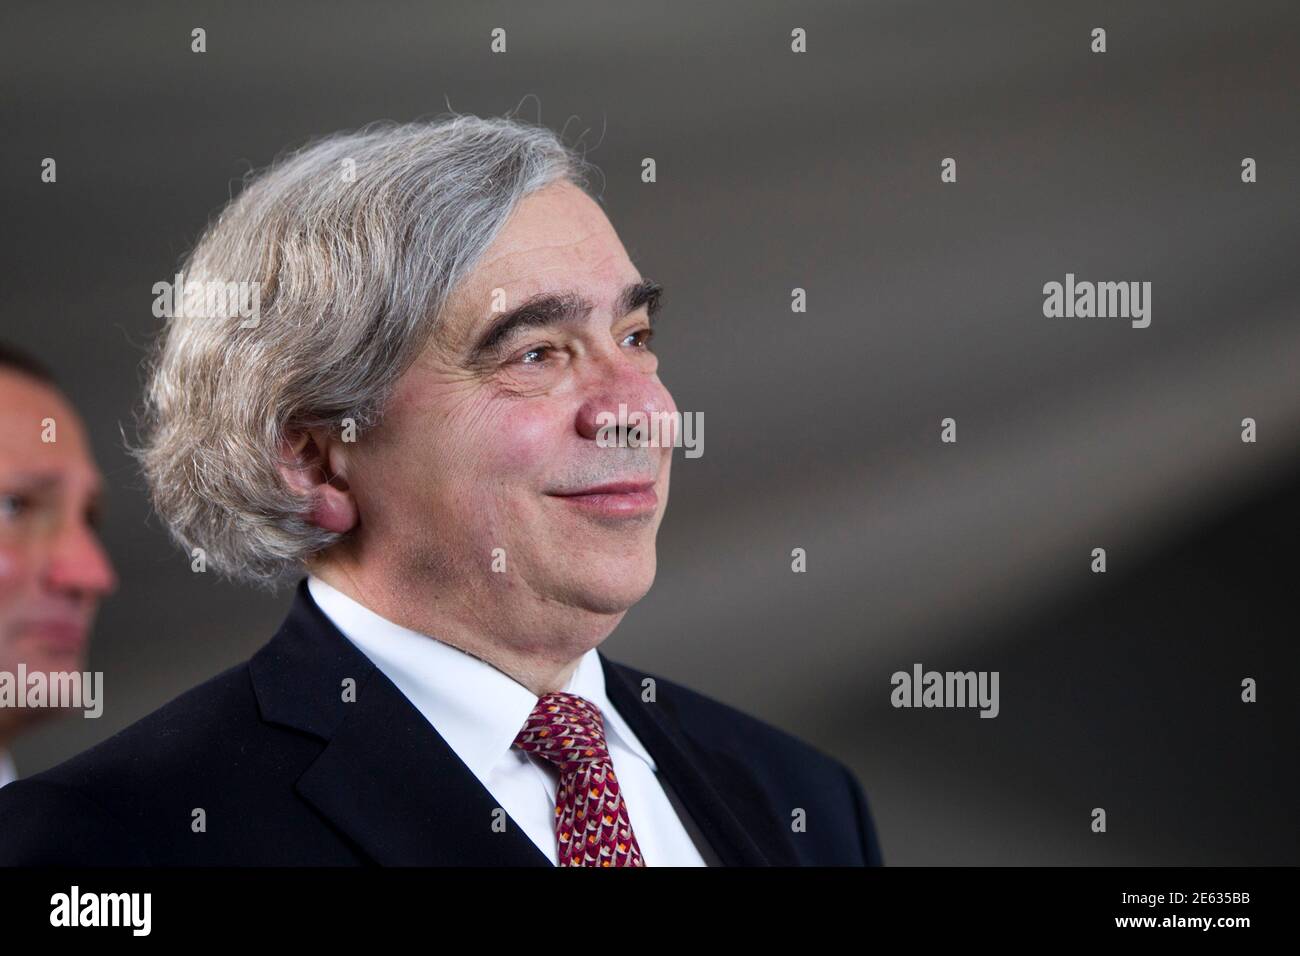 United States Secretary of Energy Ernest Moniz attends the grand opening of the Ivanpah Solar Electric Generating System in the Mojave Desert near the California-Nevada border February 13, 2014. The project, a partnership of NRG, BrightSource, Google and Bechtel, is the world's largest solar thermal facility and uses 347,000 sun-facing mirrors to produce 392 Megawatts of electricity, enough energy to power more than 140,000 homes. REUTERS/Steve Marcus (UNITED STATES - Tags: ENERGY SCIENCE TECHNOLOGY BUSINESS POLITICS) Stock Photo